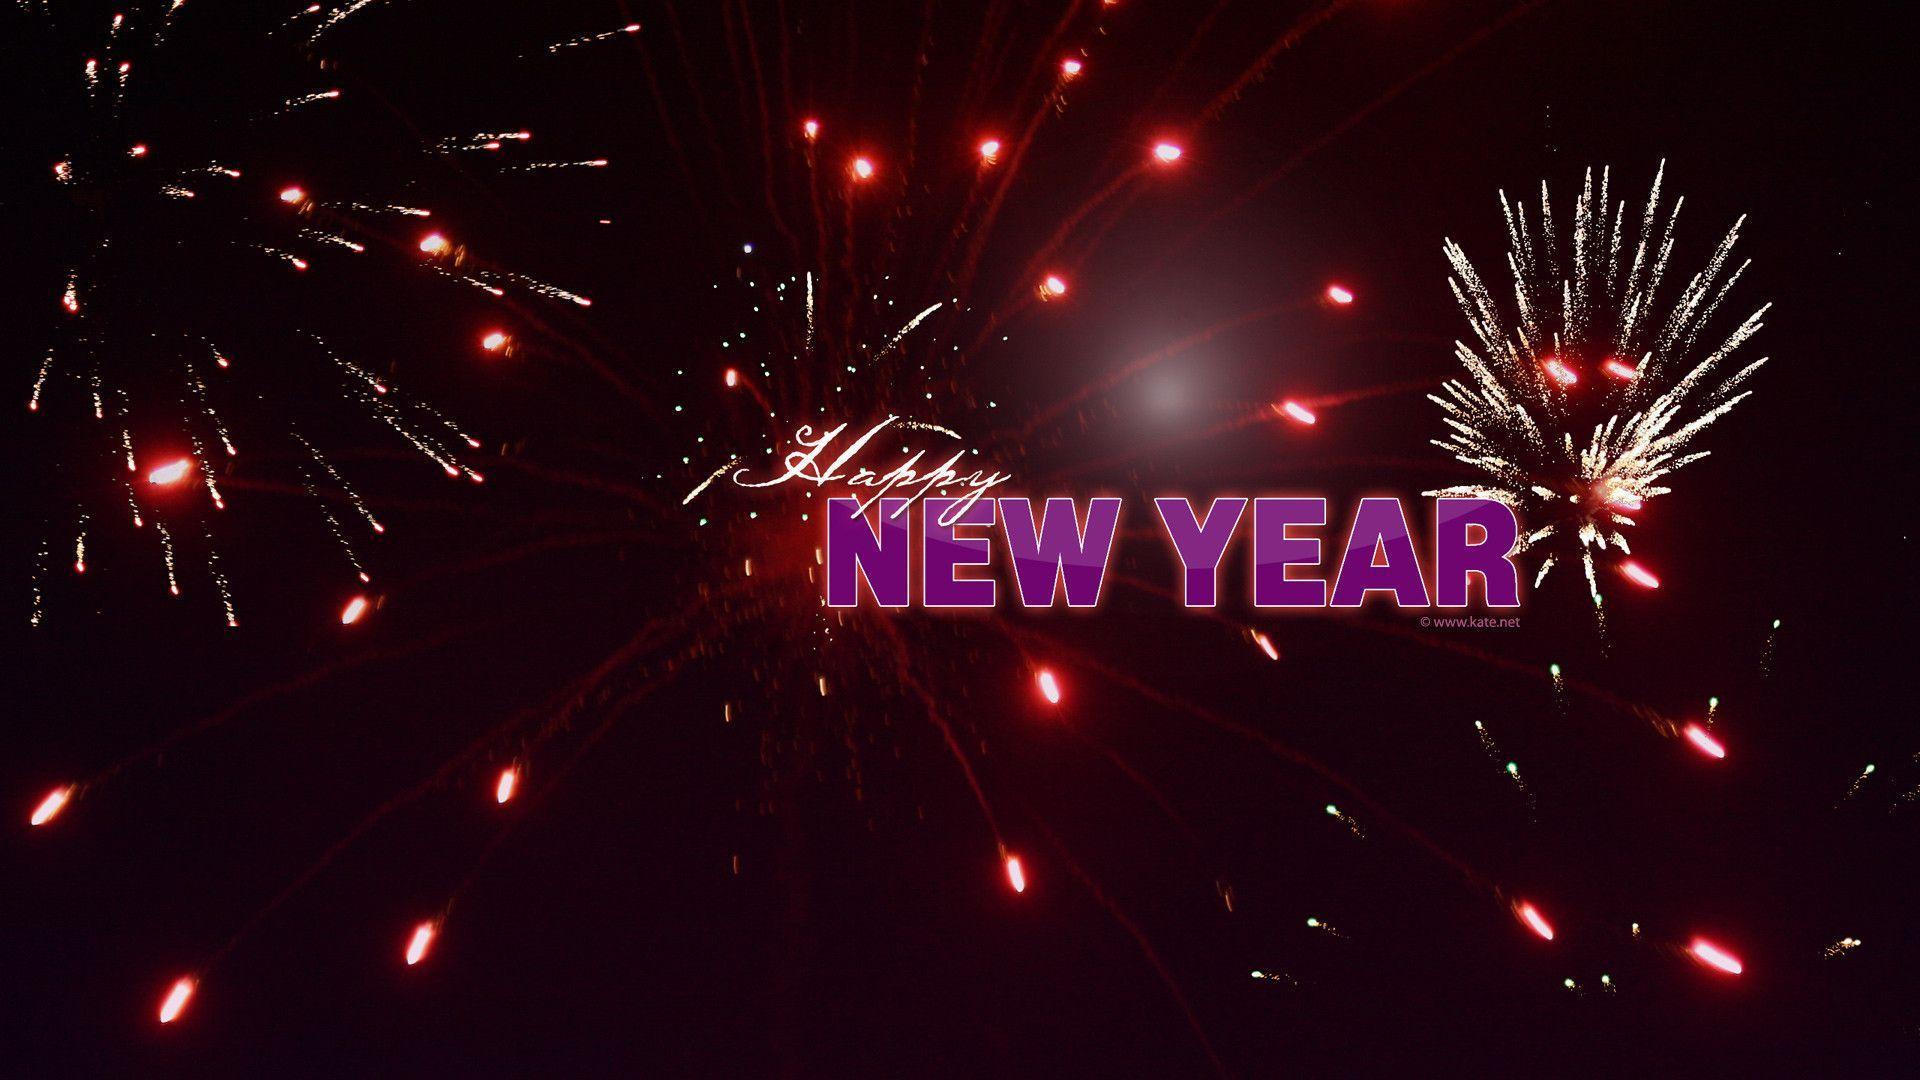 New Year Wallpaper Image Picture, Wallpaper, HD Wallpaper, New